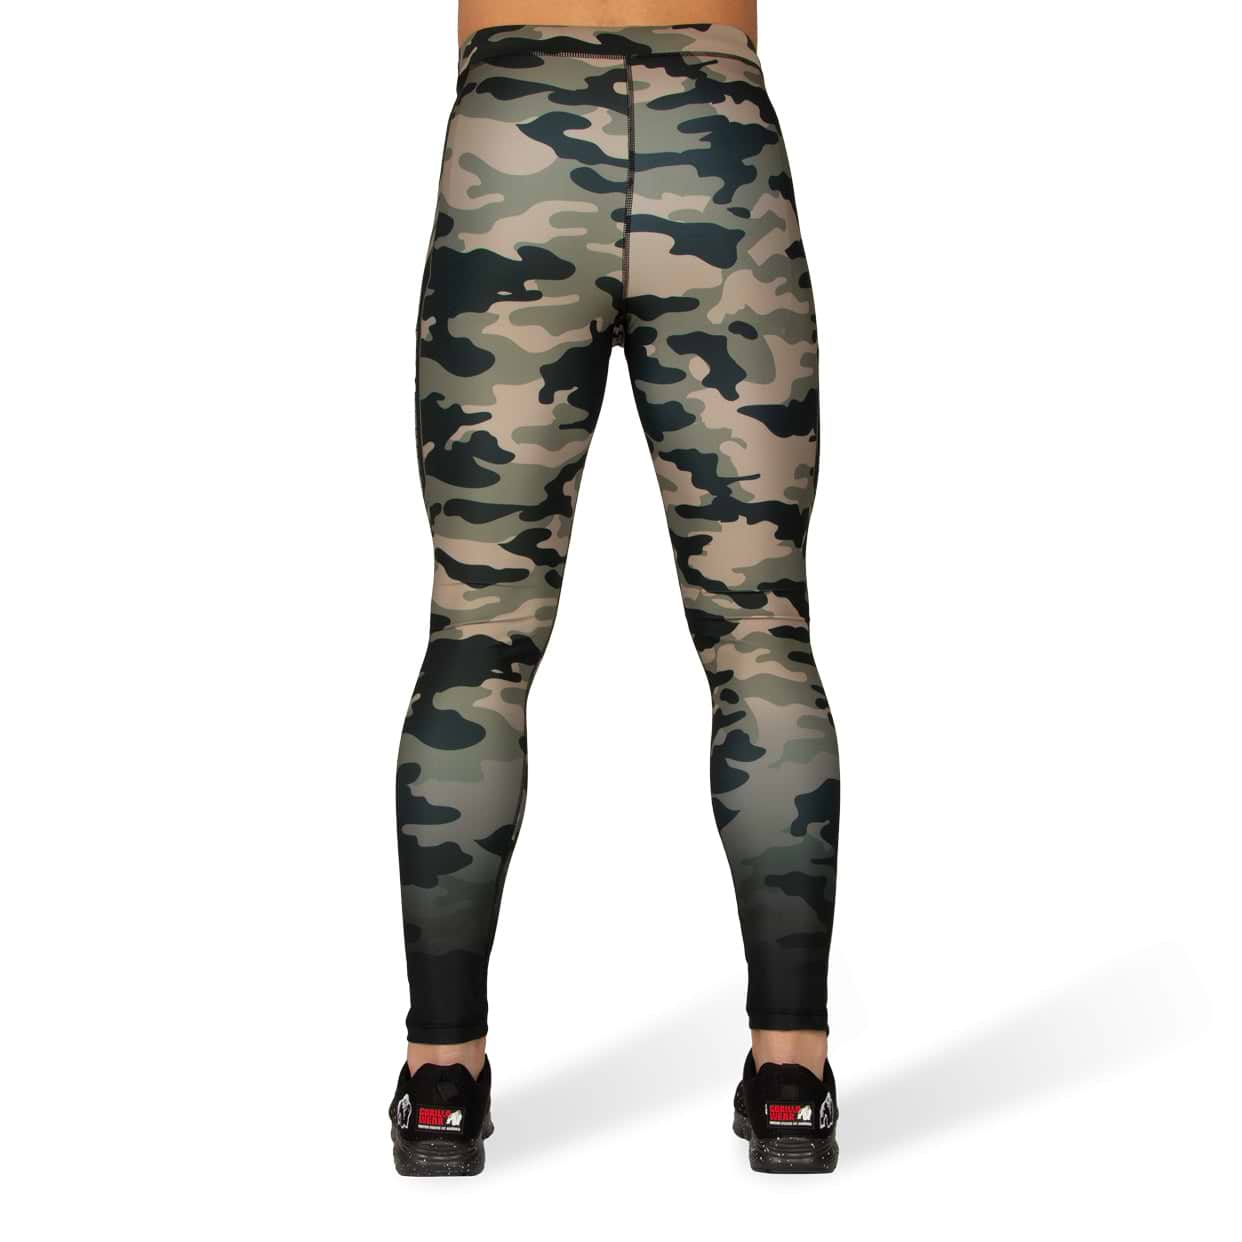 Conquer your workouts in style with our camo gym wear set